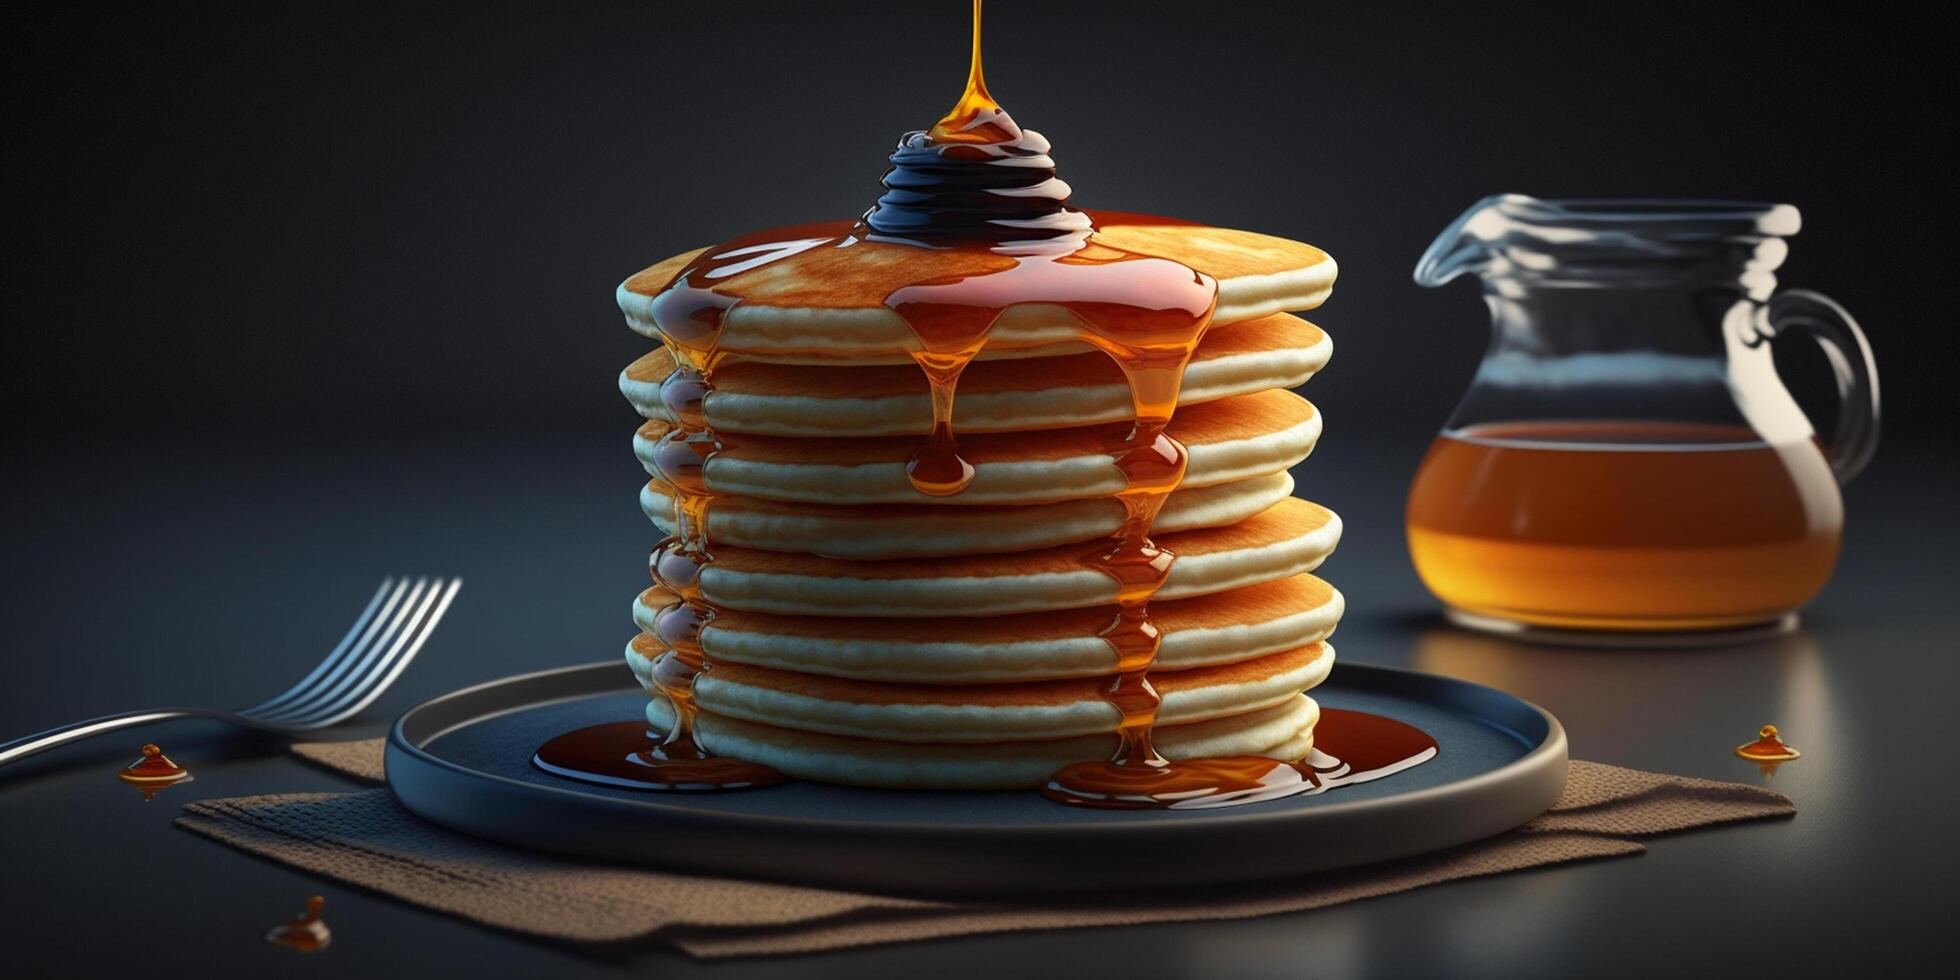 Tasty pancakes with juicy syrup illustration photo